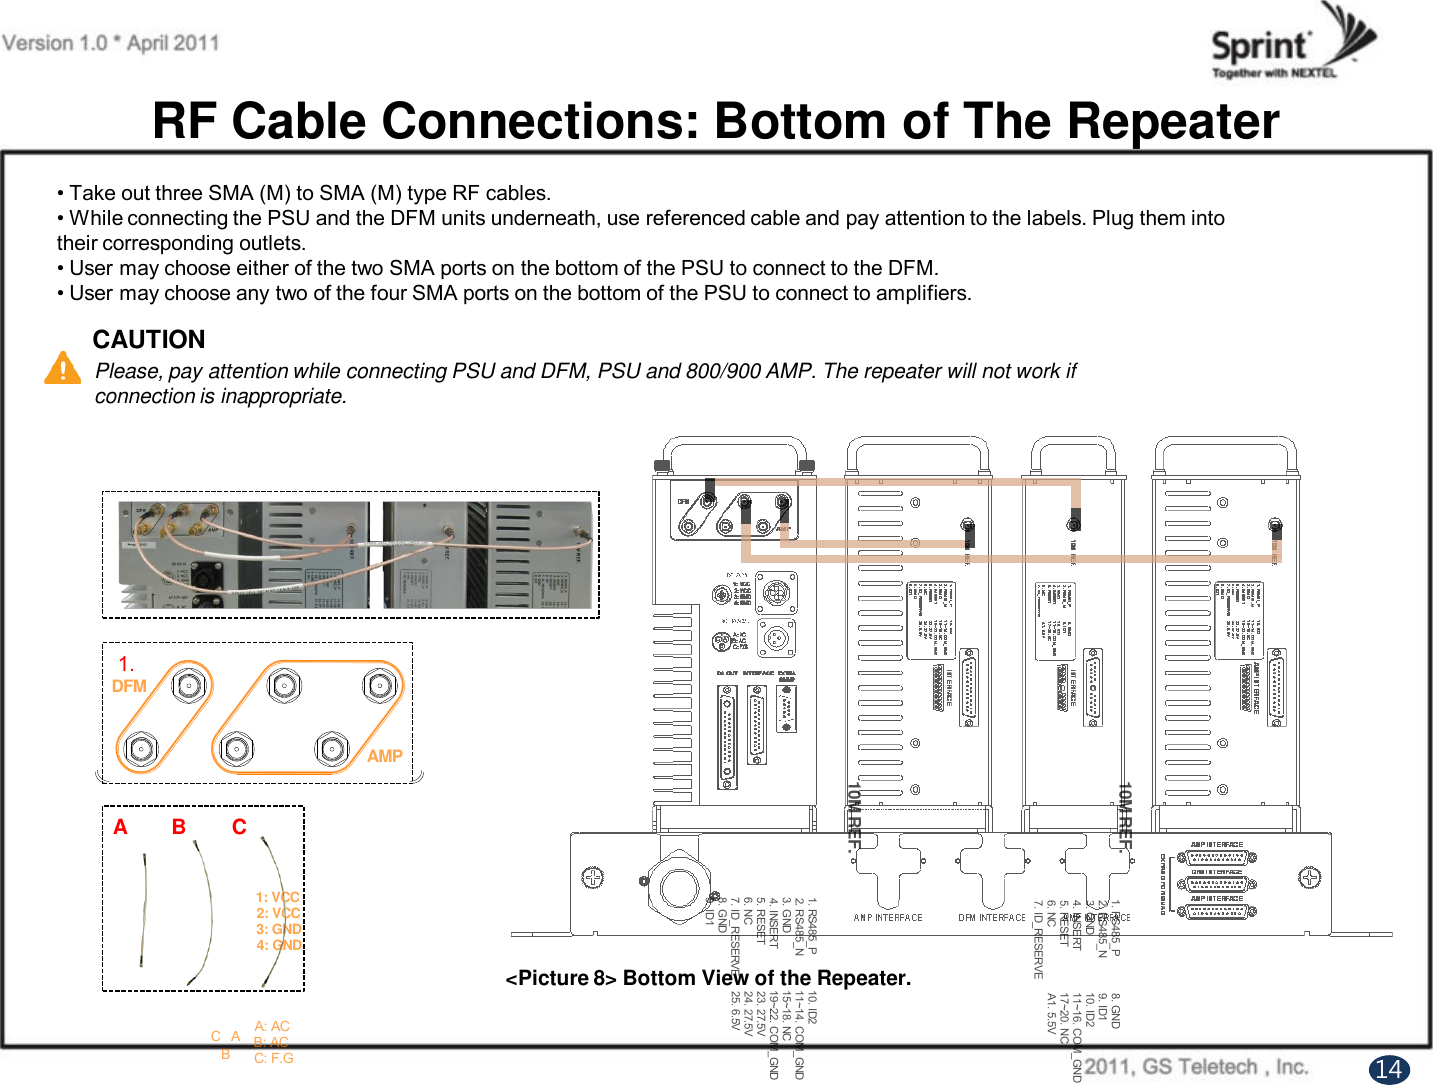 RF Cable Connections: Bottom of The Repeater• Take out three SMA (M) to SMA (M) type RF cables.• While connecting the PSU and the DFM units underneath, use referenced cable and pay attention to the labels. Plug them intotheir corresponding outlets.• User may choose either of the two SMA ports on the bottom of the PSU to connect to the DFM.• User may choose any two of the four SMA ports on the bottom of the PSU to connect to amplifiers.CAUTIONPlease, pay attention while connecting PSU and DFM, PSU and 800/900 AMP. The repeater will not work if  connection is inappropriate. &lt;Picture 8&gt; Bottom View of the Repeater.1410M REF.13 12 11 10 9 7 6 5 4 3 2 114151617181920821222324251. RS485_P2. RS485_N3. GND4. INSERT5. RESET6. NC7. ID_RESERVE8. GND9. ID110. ID211~14. COM_GND15~18. NC19~22. COM_GND23. 27.5V24. 27.5V25. 6.5VINTERFACE10M REF.13 12 11 10 9 7 6 5 432 114151617181920821222324251. RS485_P2. RS485_N3. GND4. INSERT5. RESET6. NC7. ID_RESERVE8. GND9. ID110. ID211~14. COM_GND15~18. NC19~22. COM_GND23. 27.5V24. 27.5V25. 6.5VAMP INTERFACE10M REF.10 9 7 6 5 432 11112161718192081. RS485_P2. RS485_N3. GND4. INSERT5. RESET6. NC7. ID_RESERVE8. GND9. ID110. ID211~16. COM_GND17~20. NCA1. 5.5VINTERFACE1415 13A1C AB1: VCC2: VCC3: GND4: GNDINTERFACE EXTRASNMPA: ACB: ACC: F.GDC OUTDFMAMPAMP INTERFACEDFM INTERFACEAMP INTERFACEEXPAND FOR QUADAMP INTERFACE DFM INTERFACE AMP INTERFACE1.A B C